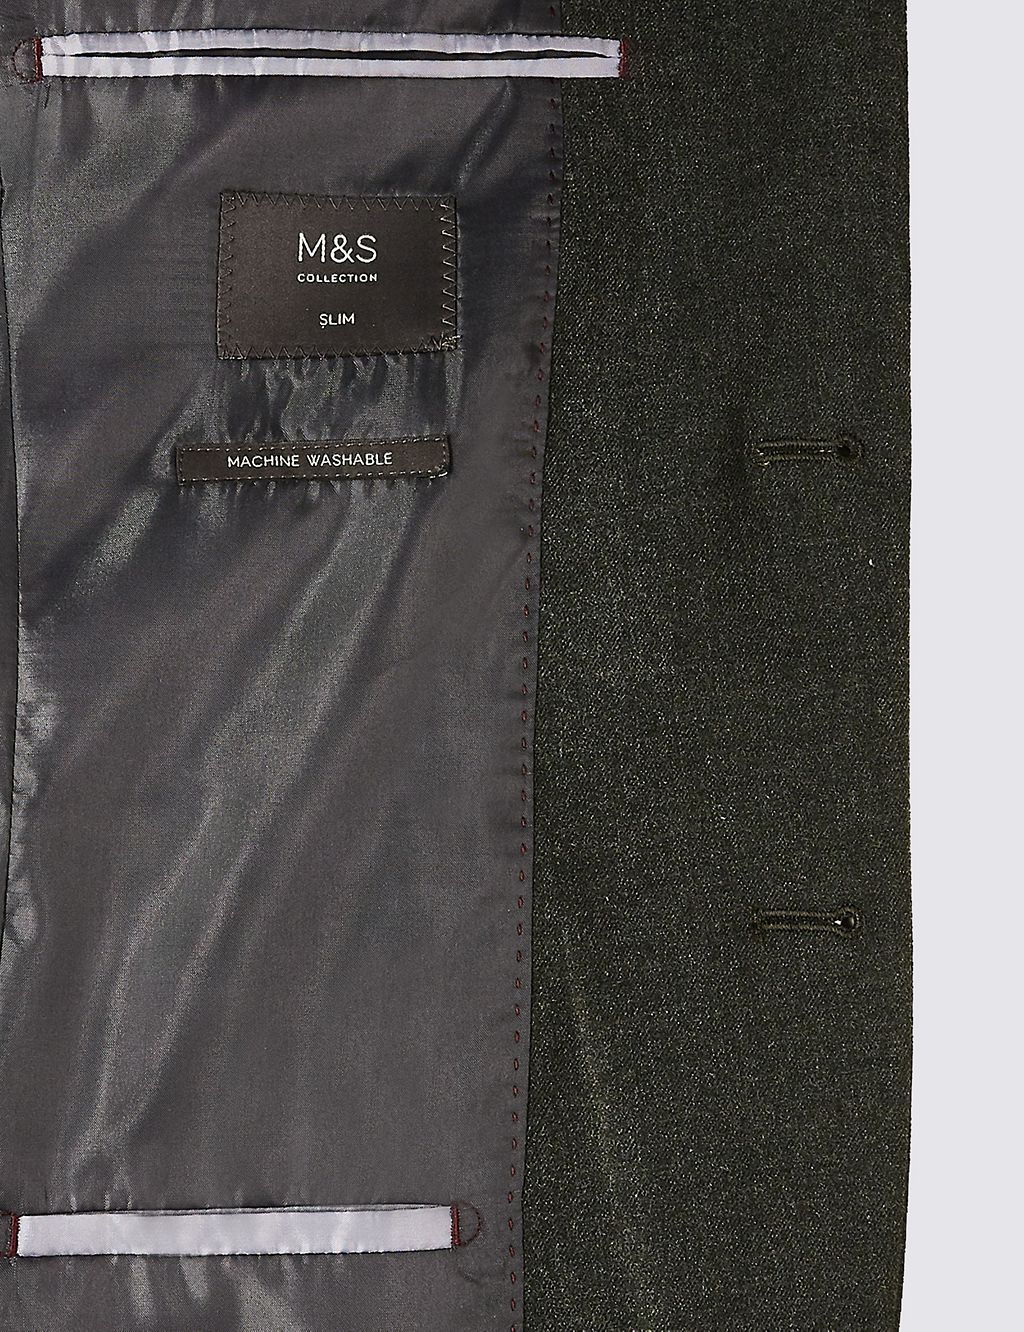 Charcoal Textured Slim Fit Jacket 5 of 8